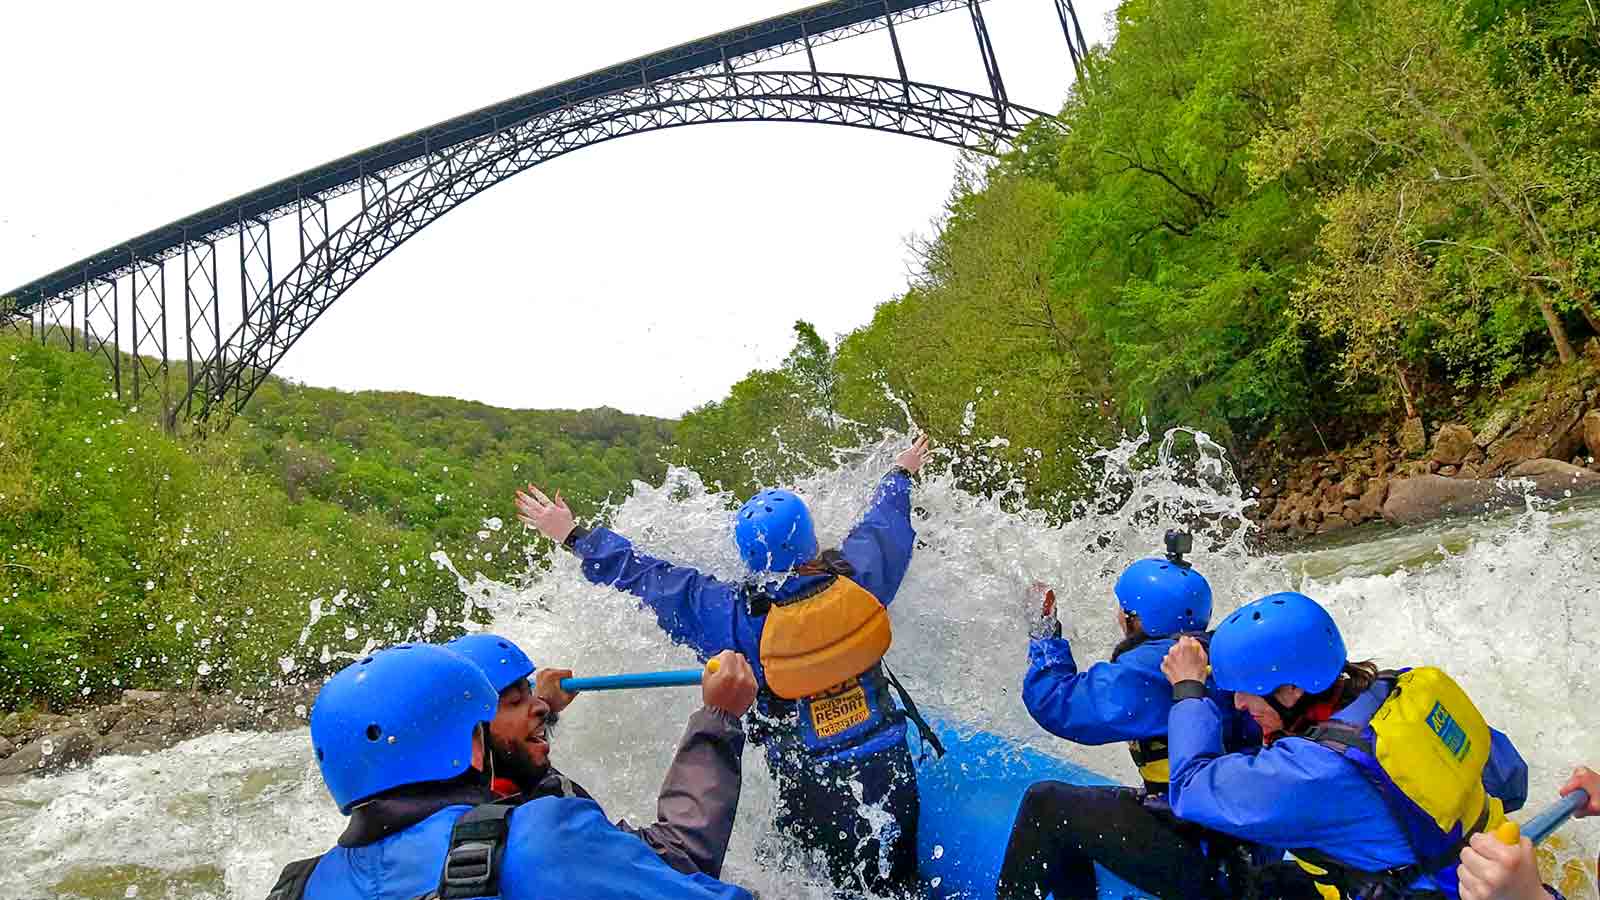 A group of rafters enjoy new river gorge white water rafting in fayette staction rapid beneath the new river gorge bridge in the national park.